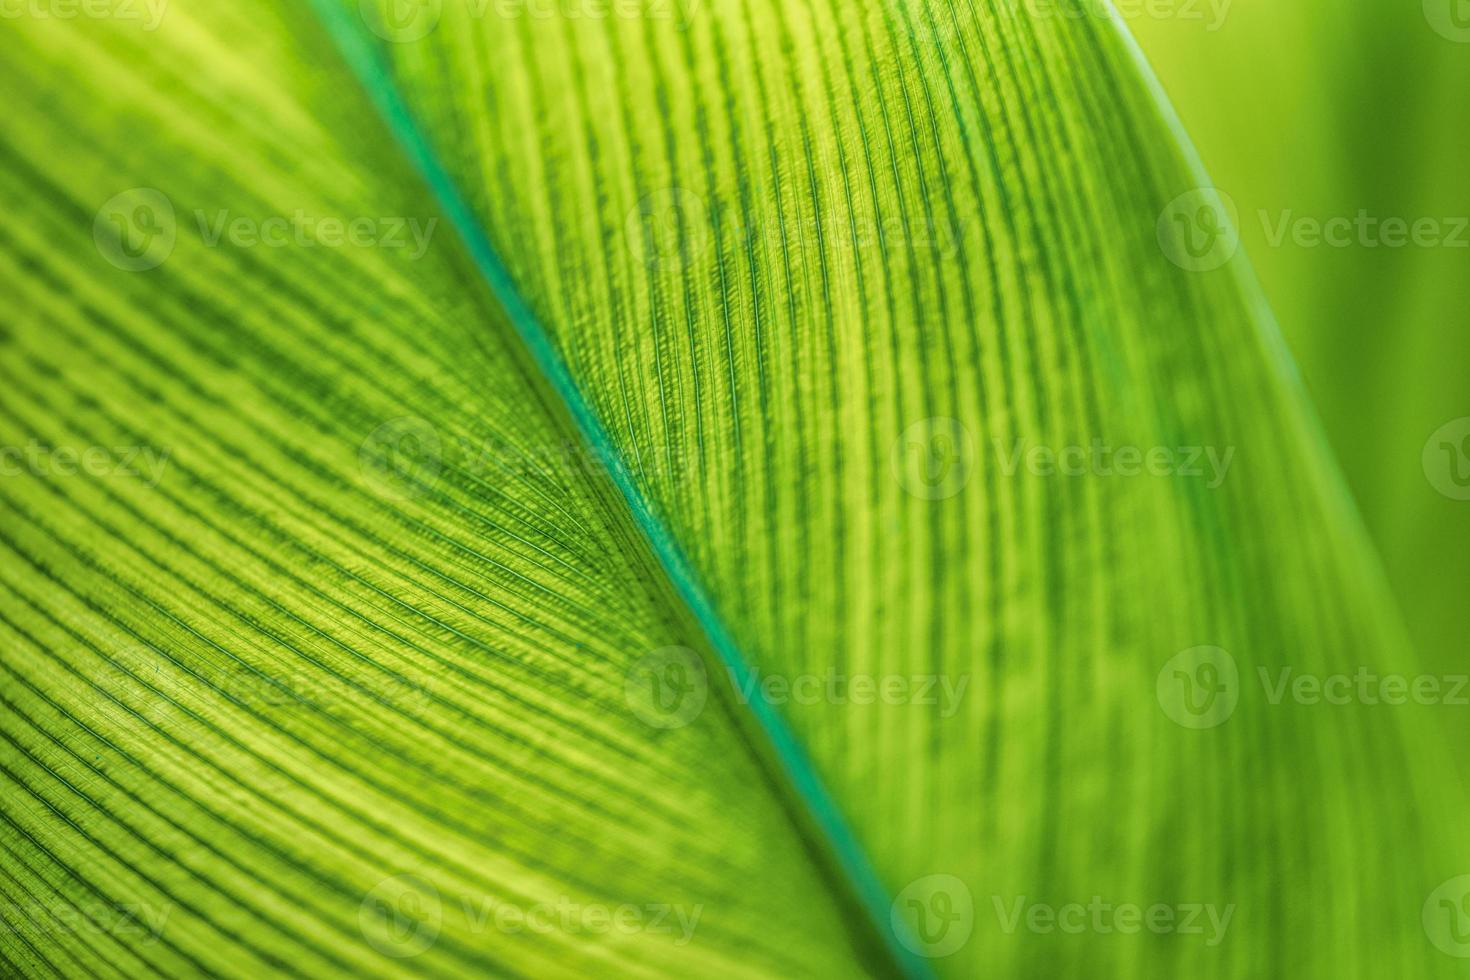 Green leaves background with copy space, close up texture of palm leaf. Sunny tropical garden plant, forest environment, summer growth, freshness, leaf macro. Artistic nature closeup, relaxing natural photo